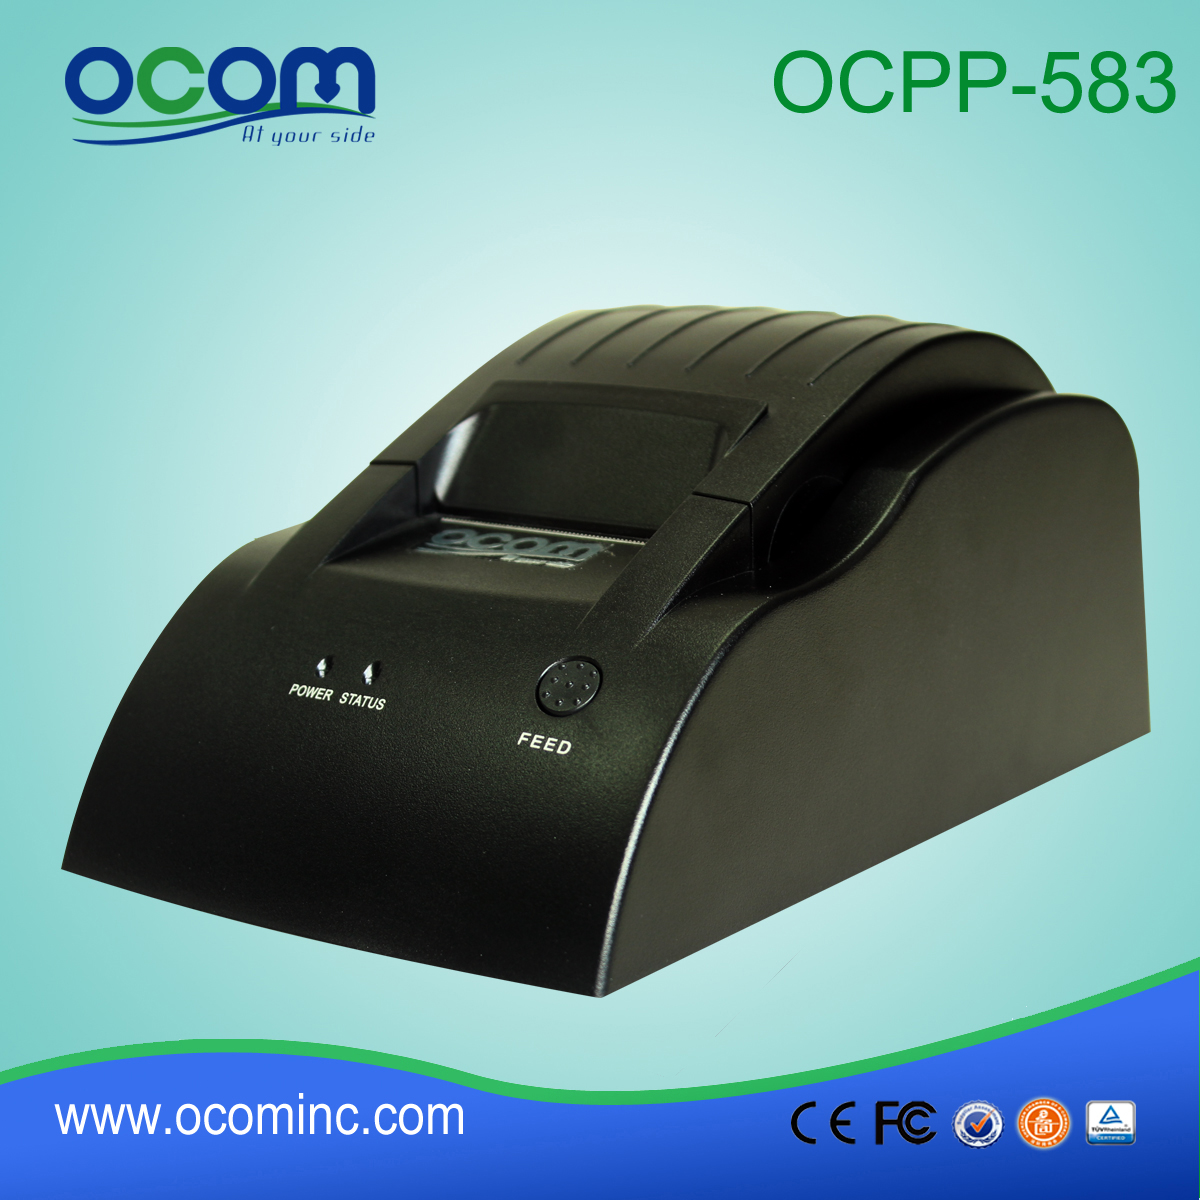 58mm thermal printer android  (OCPP-583)